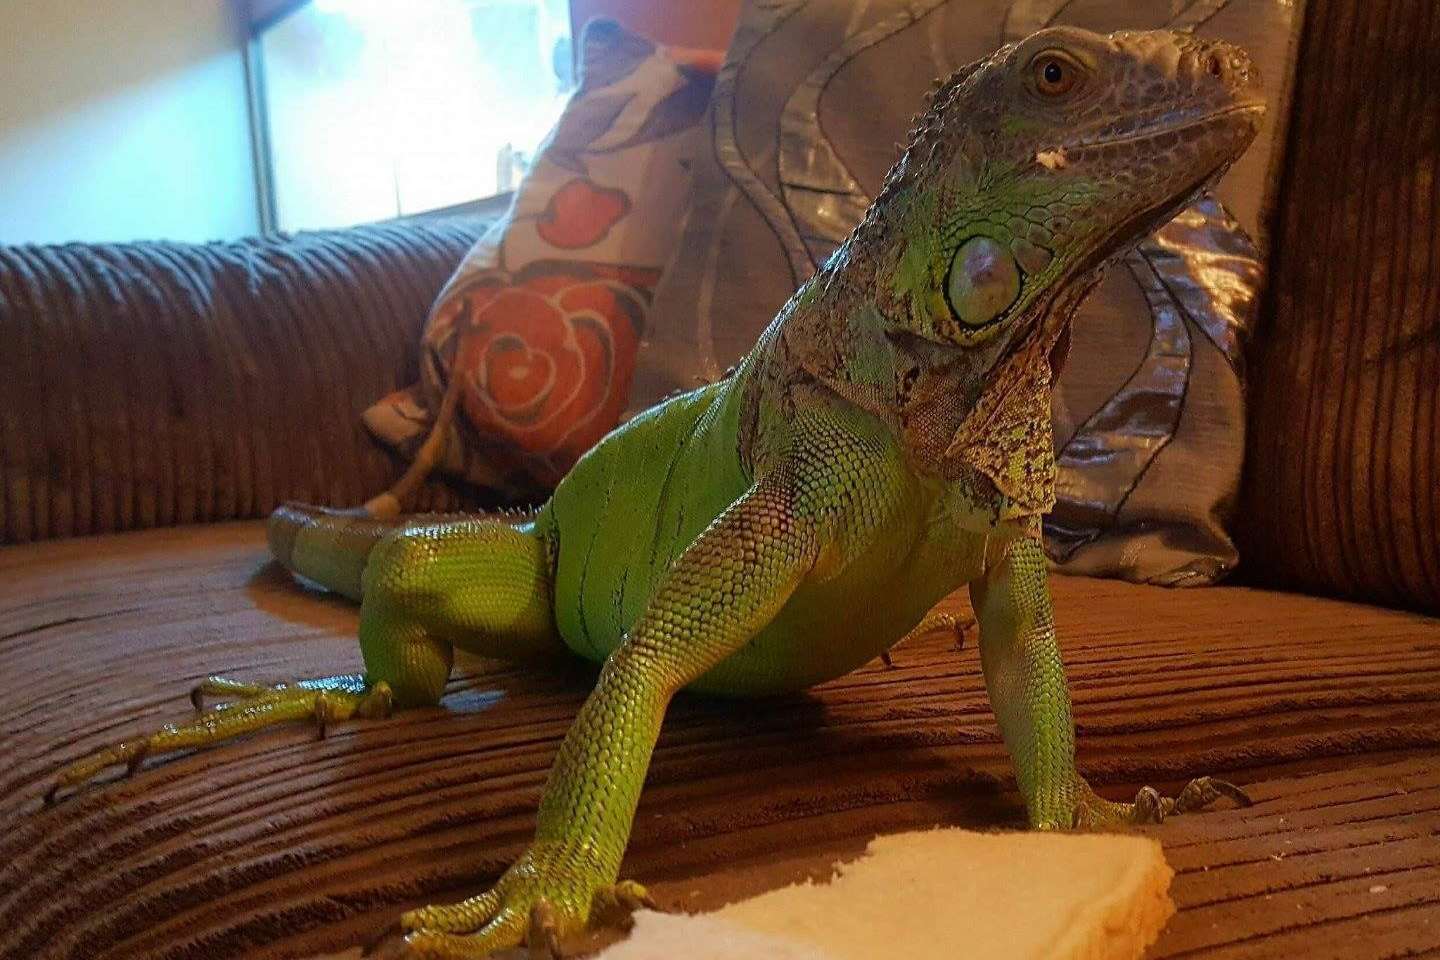 The green reptile went missing about 10am on Sunday